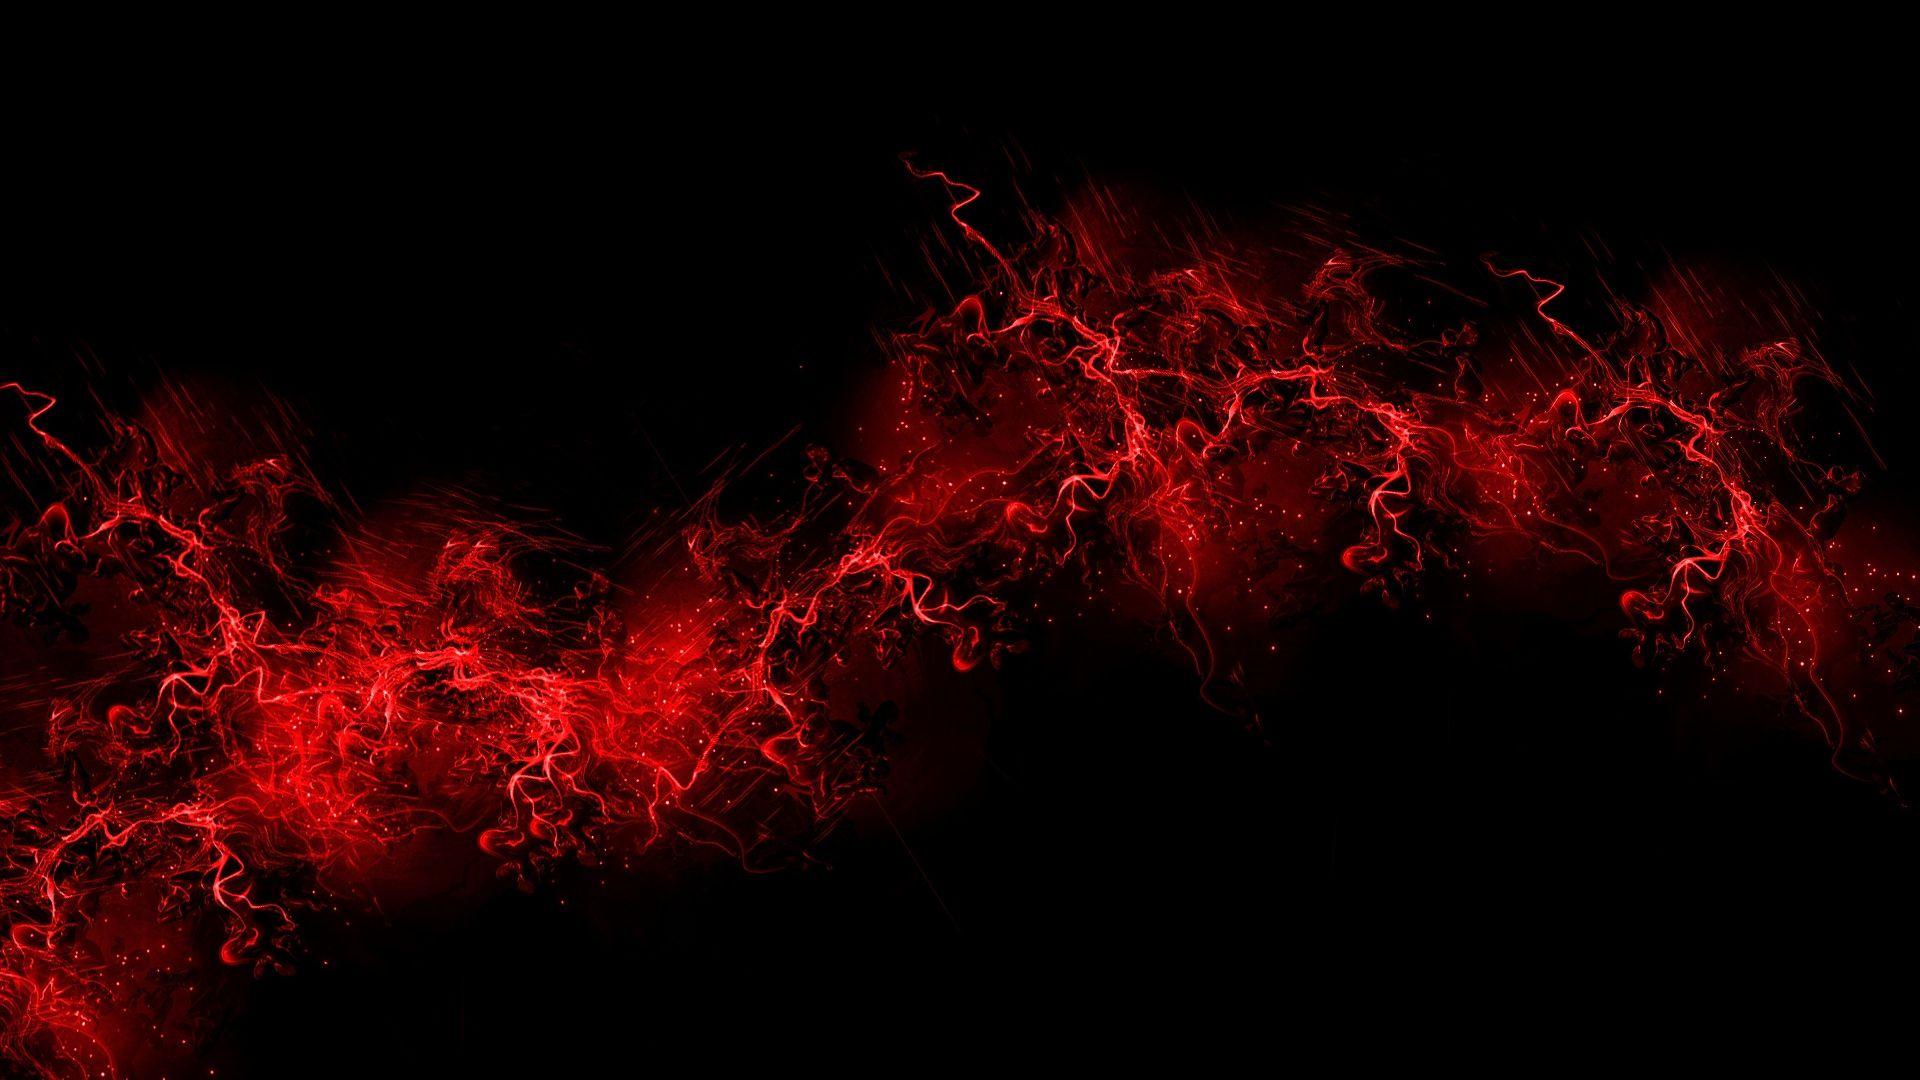 Beautiful Black and Red Wallpaper. Best Wallpaper Collection